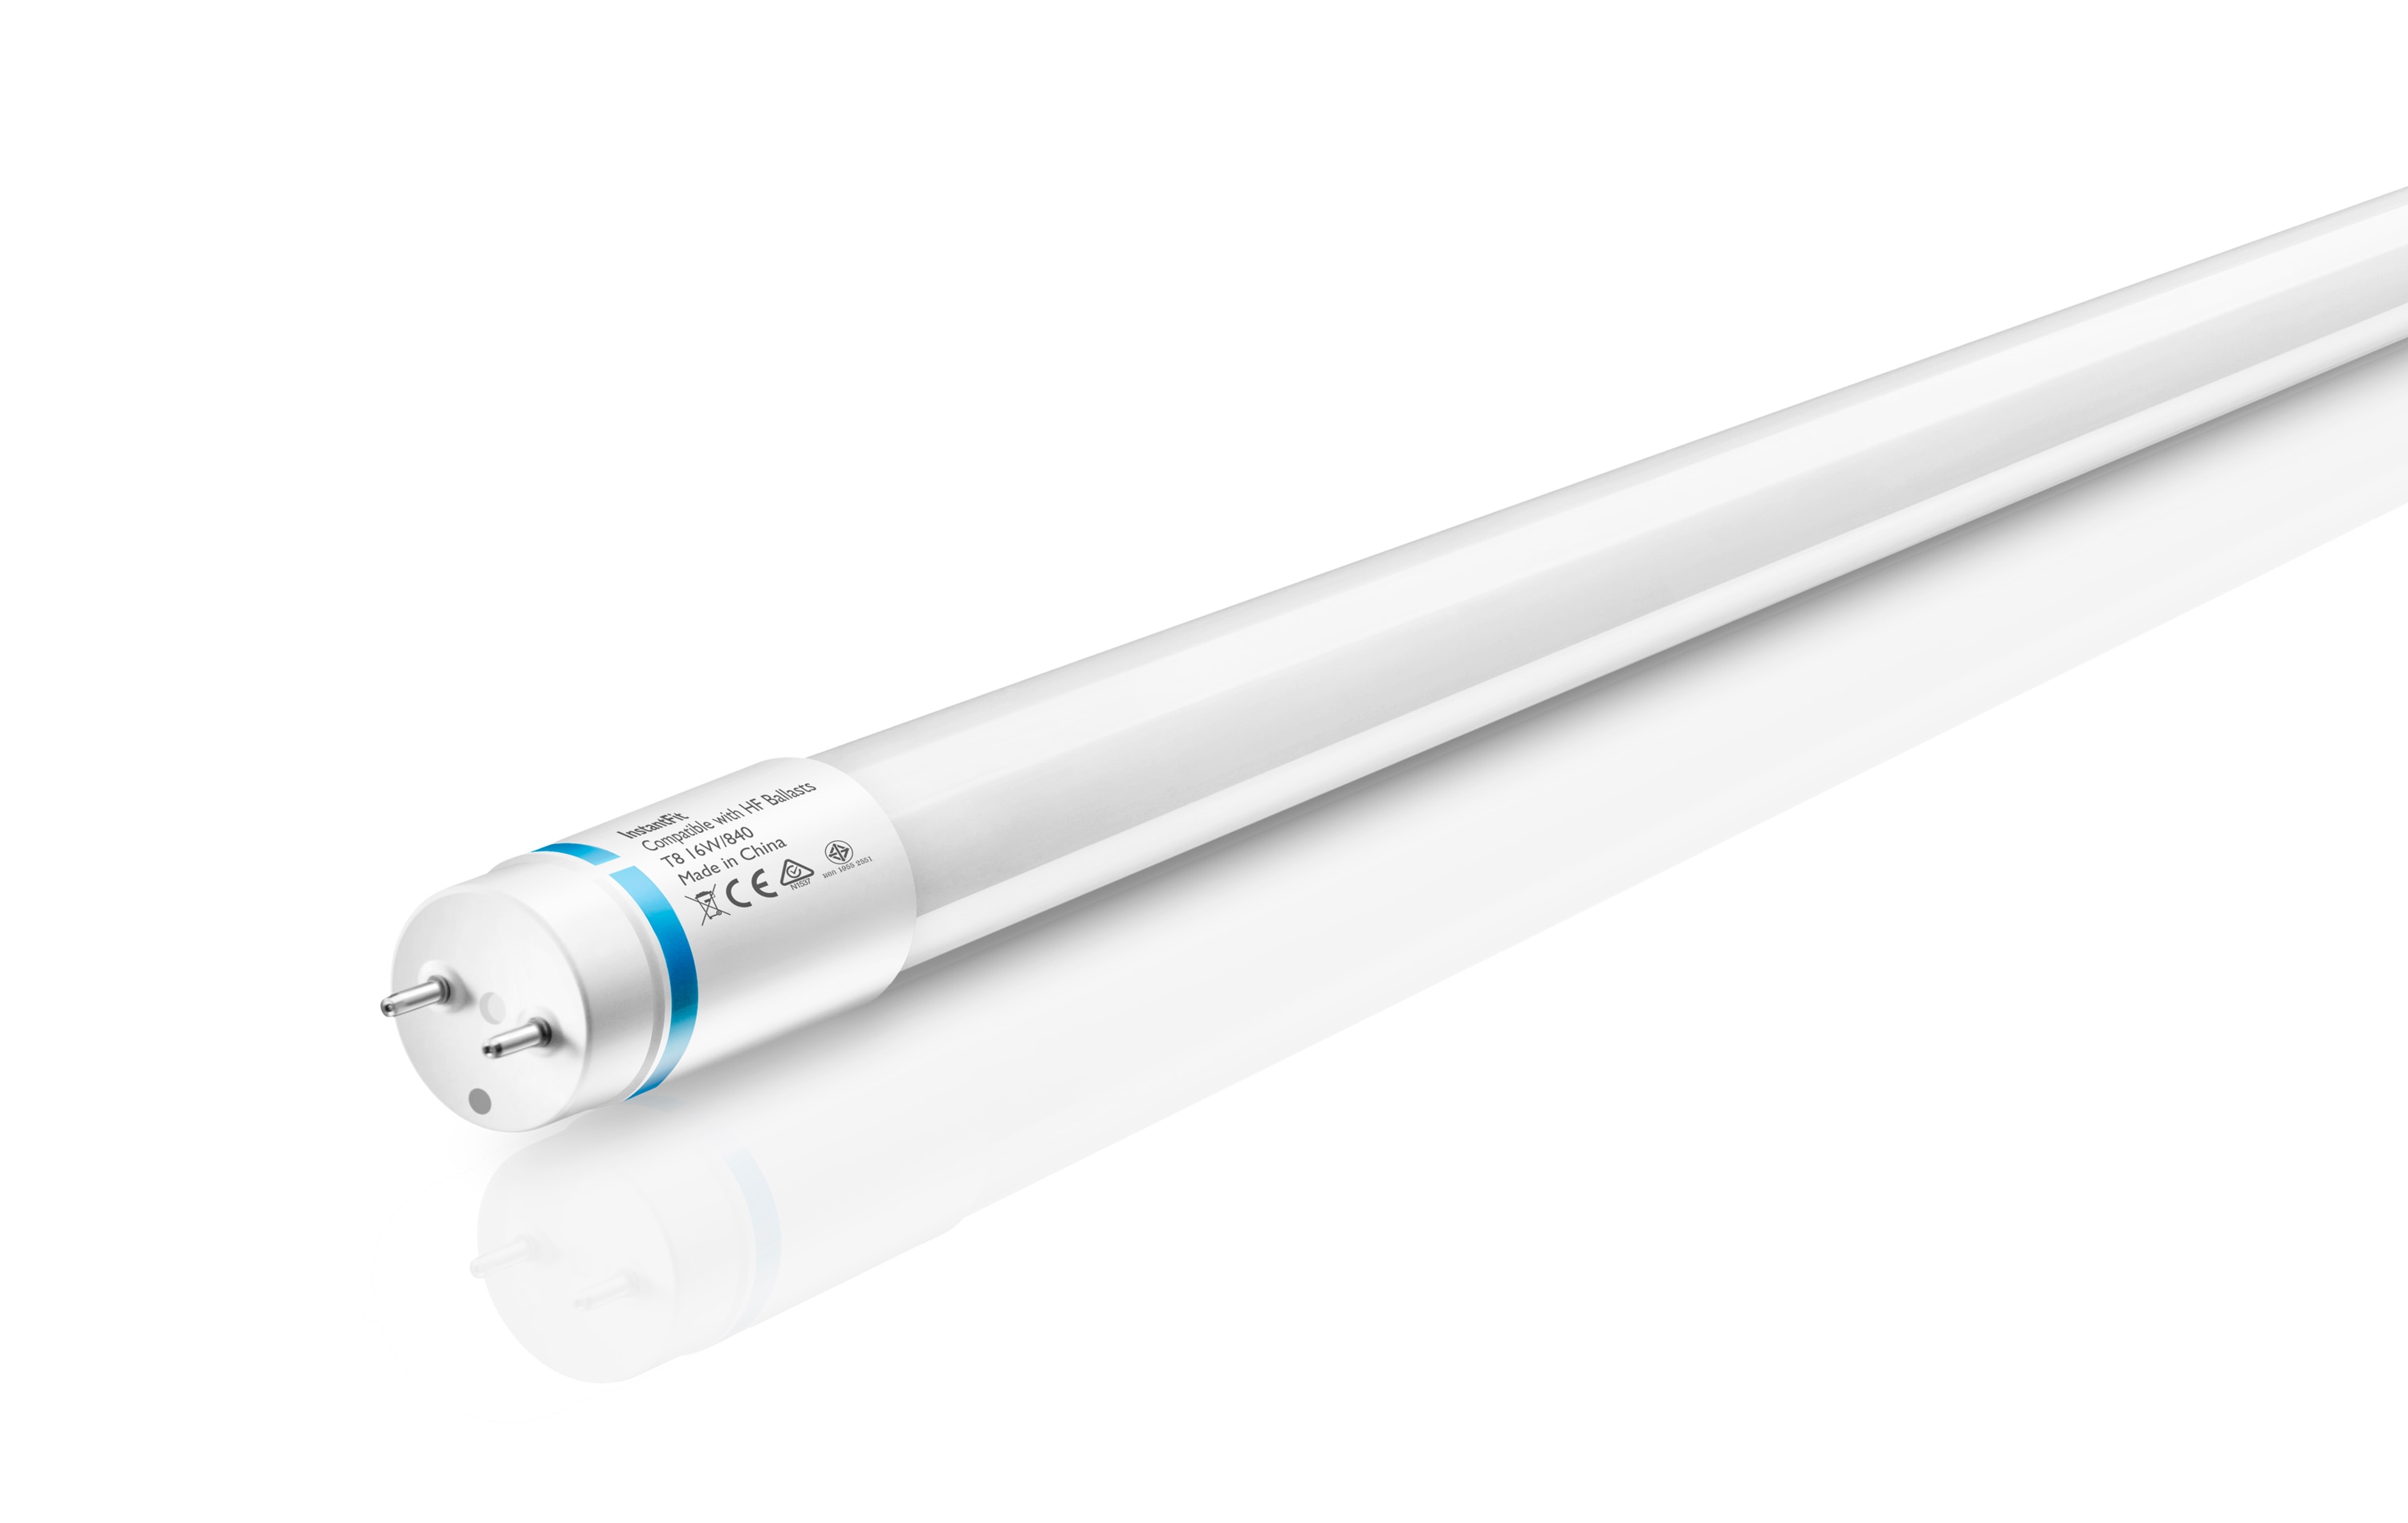 knal zeemijl galblaas New InstantFit LED T8 from Philips Slashes Cost and time to replace  Fluorescent Tubes with LED technology